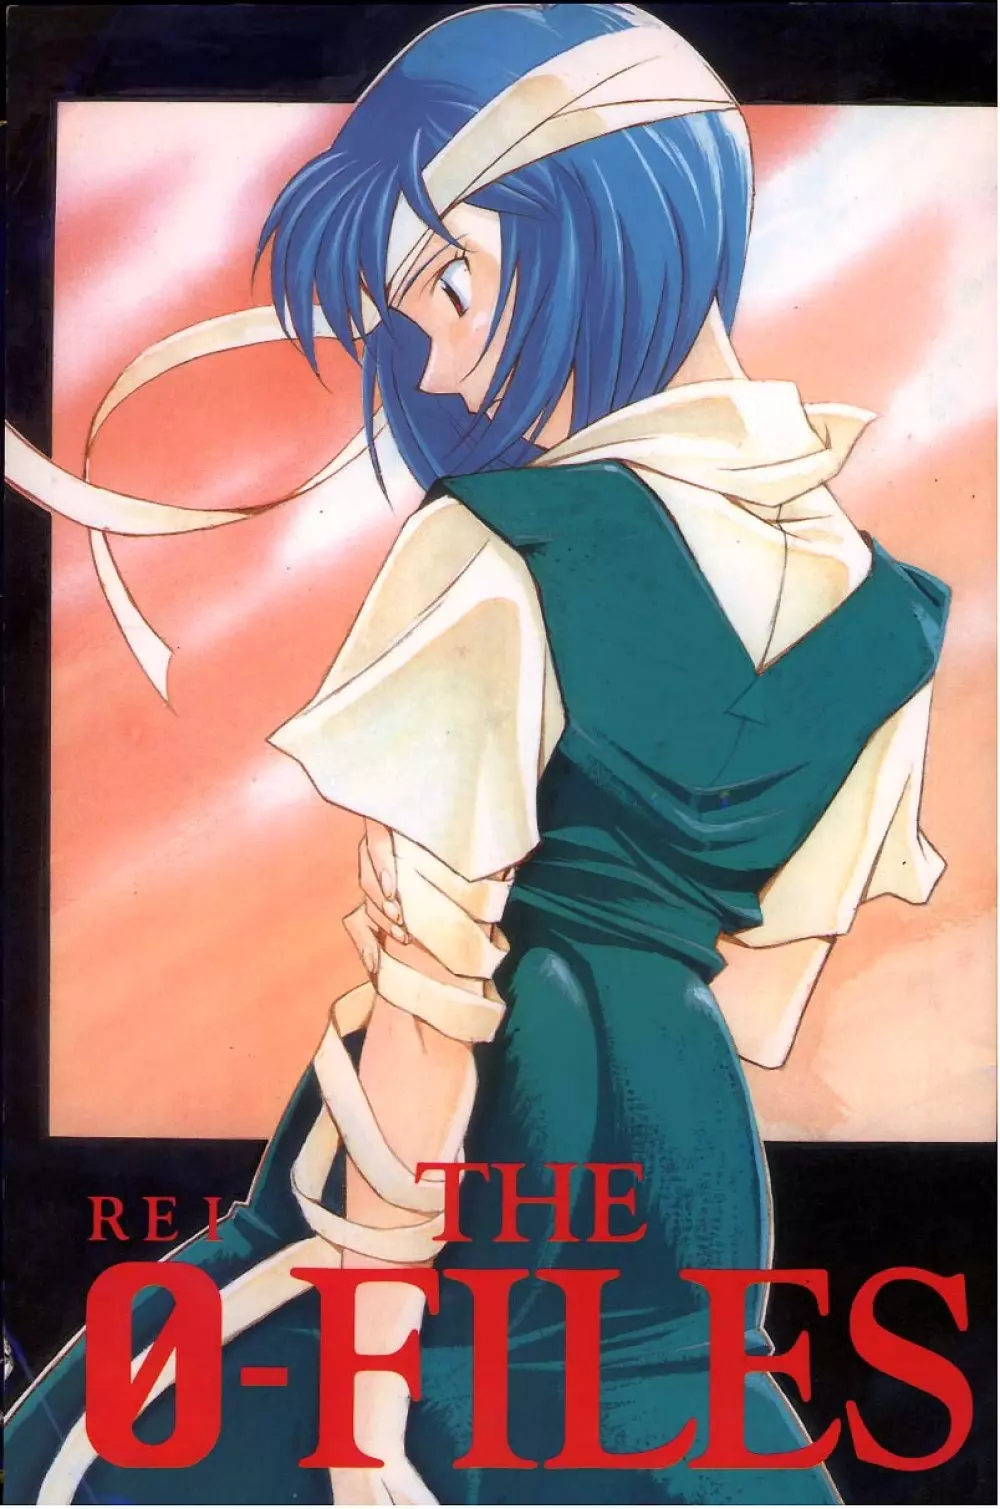 REI THE 0-FILES